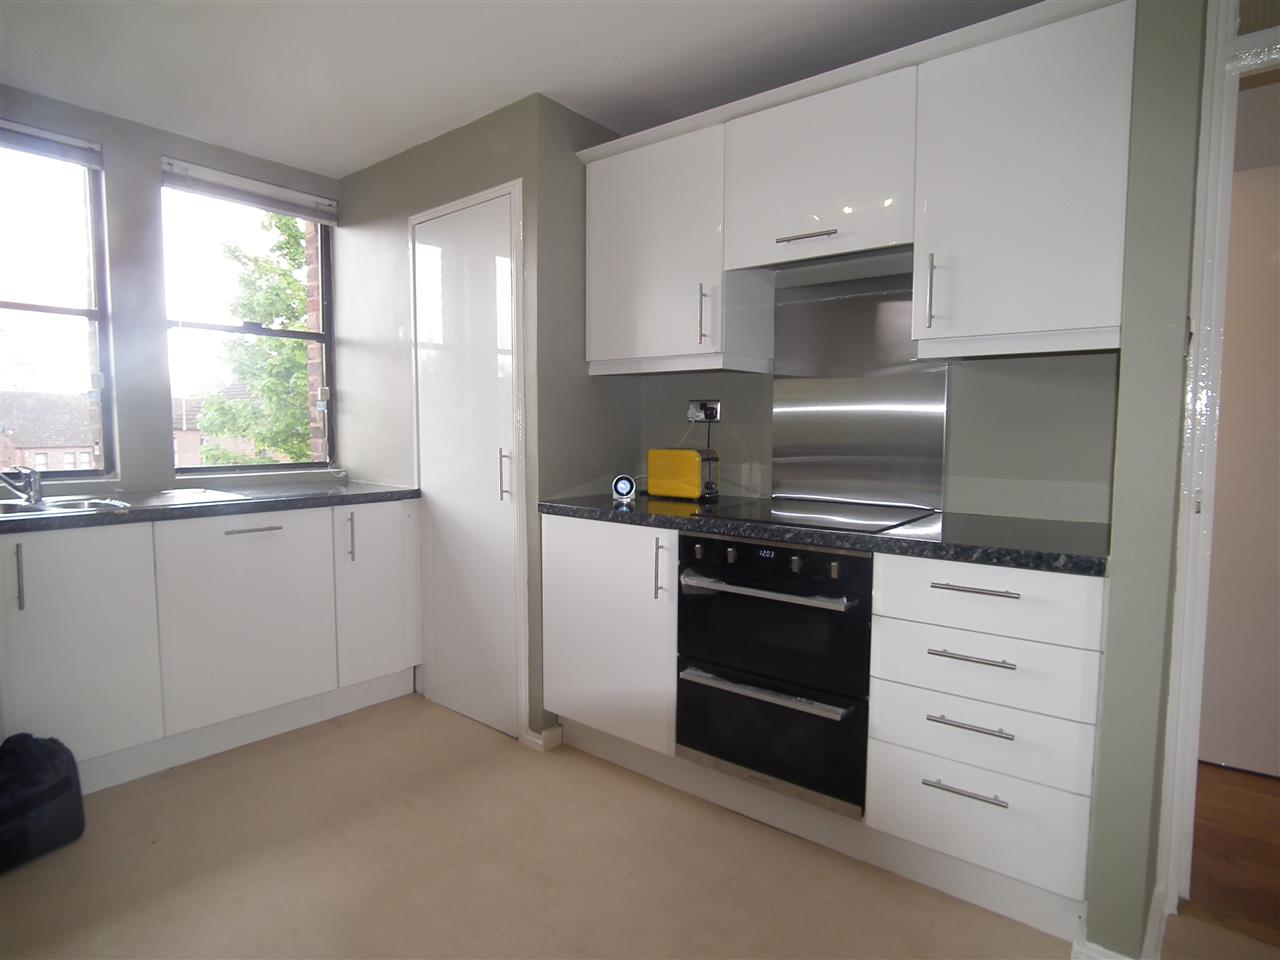 2 bed flat to rent  - Property Image 5